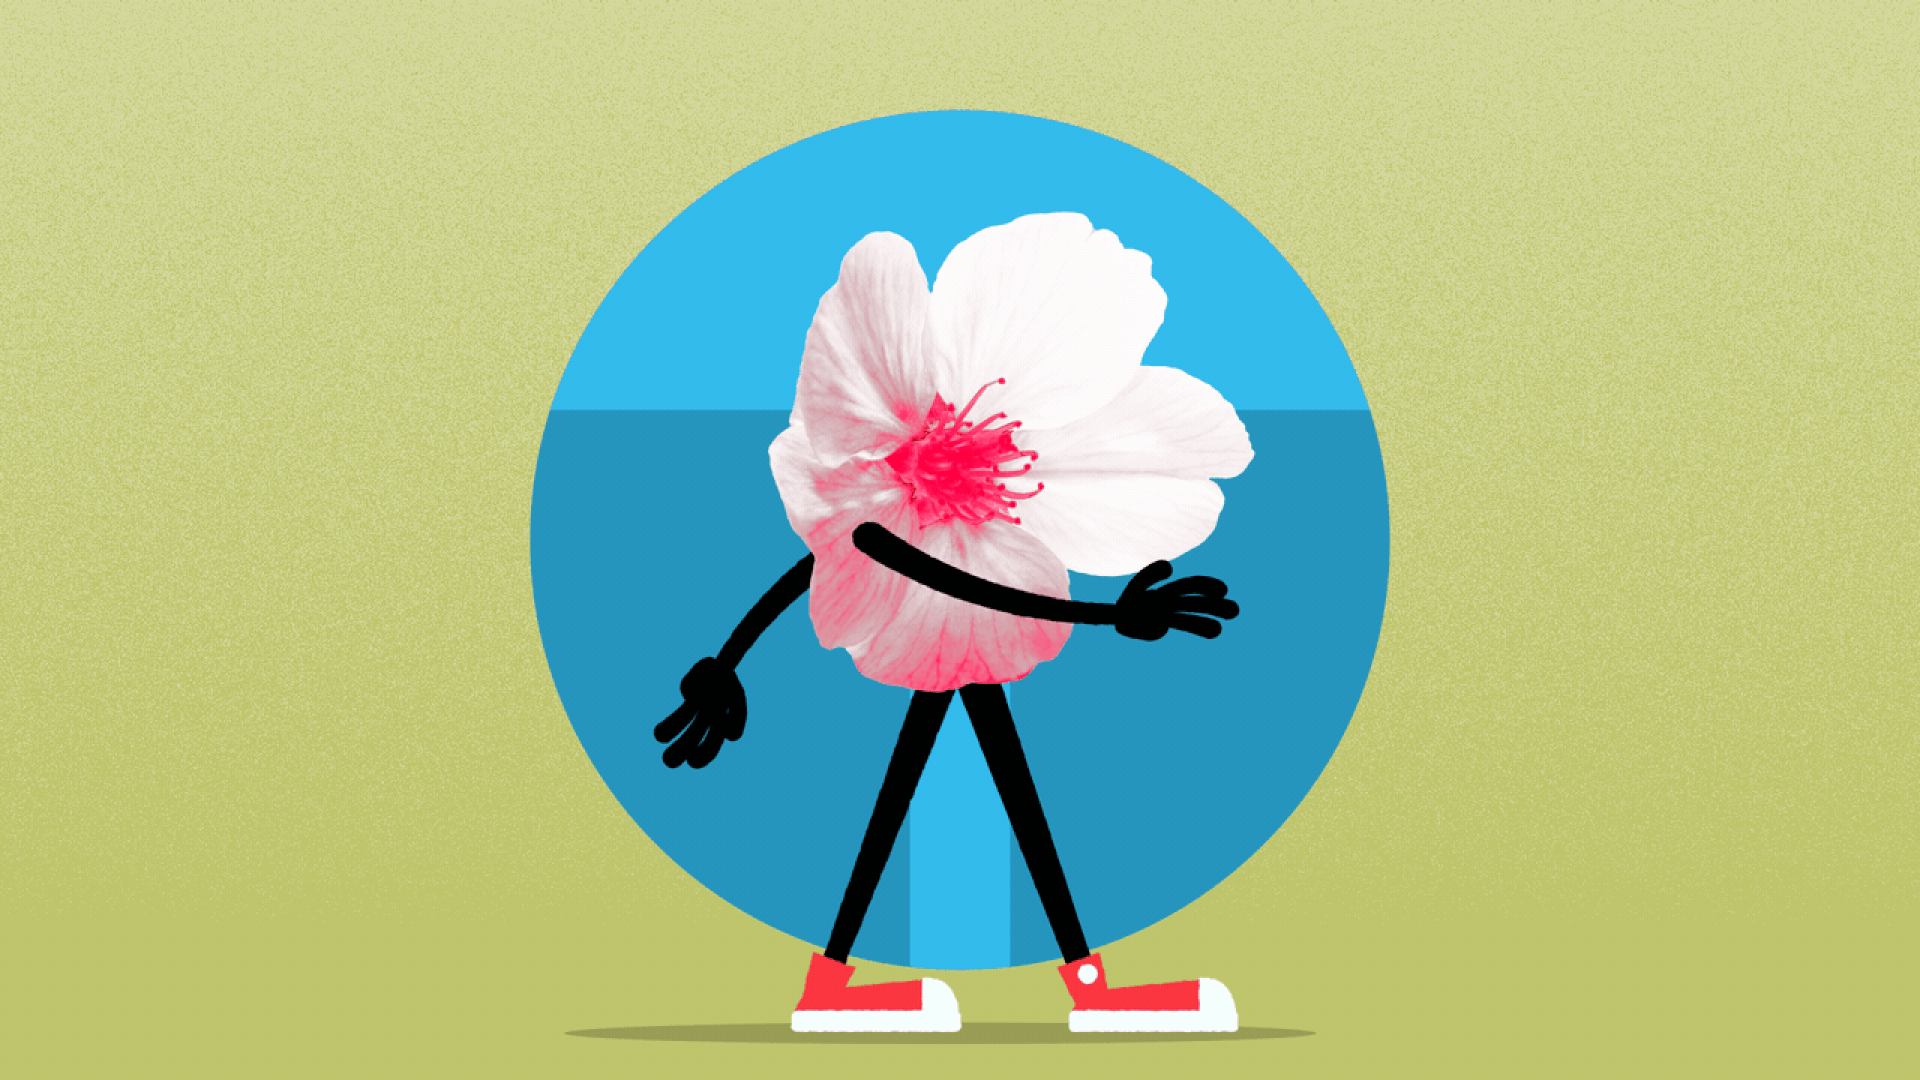 Animated illustration of a cherry blossom with arms and legs walking in front of buildings that are all the same height.